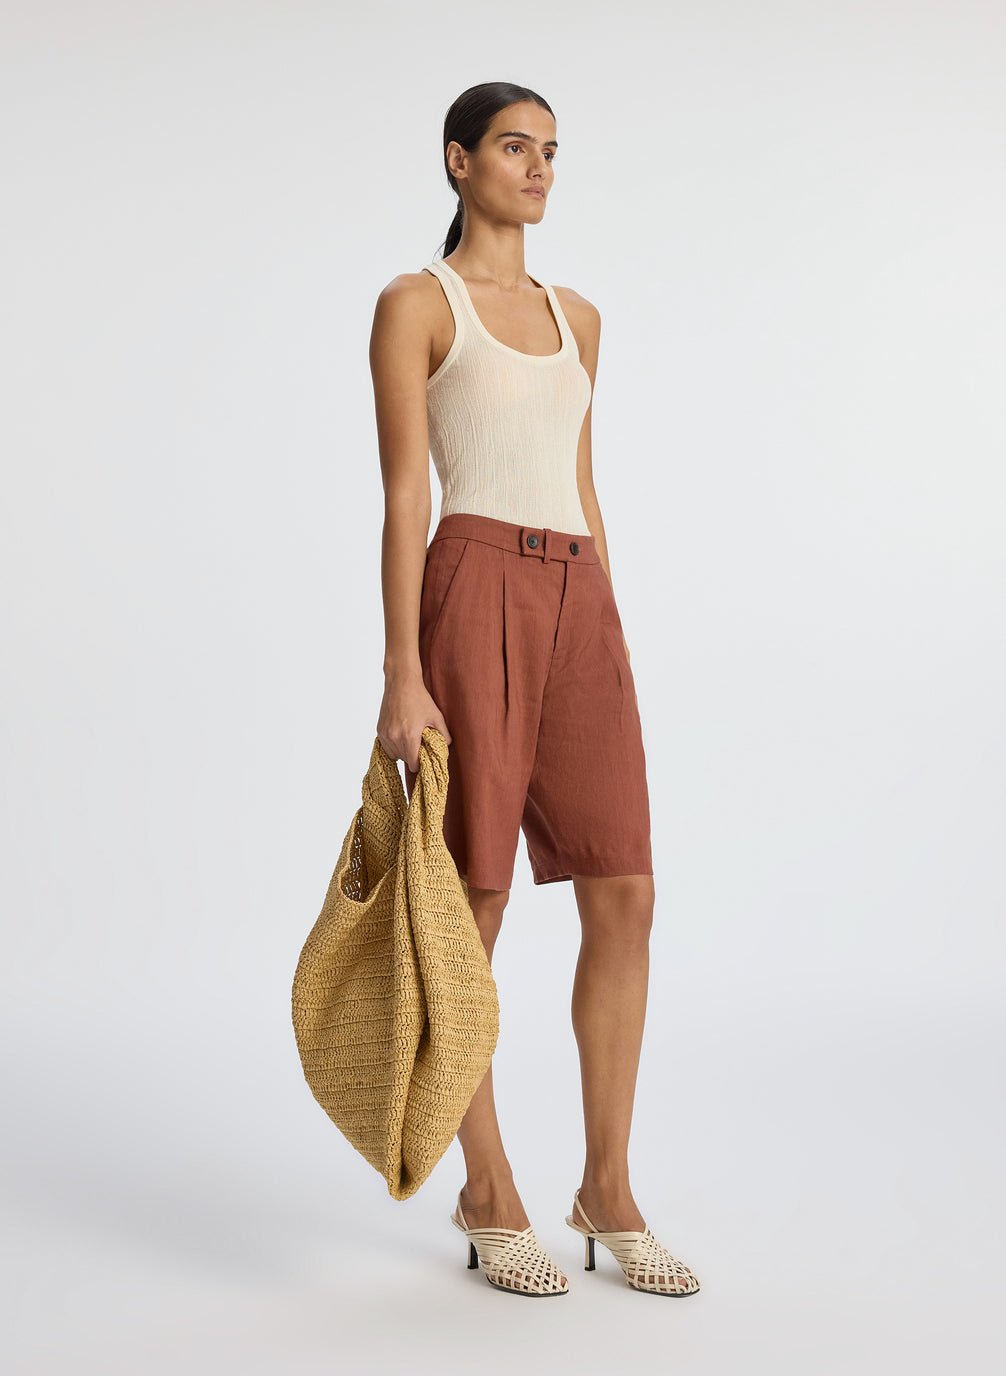 side view of woman wearing beige tank top and brown shorts